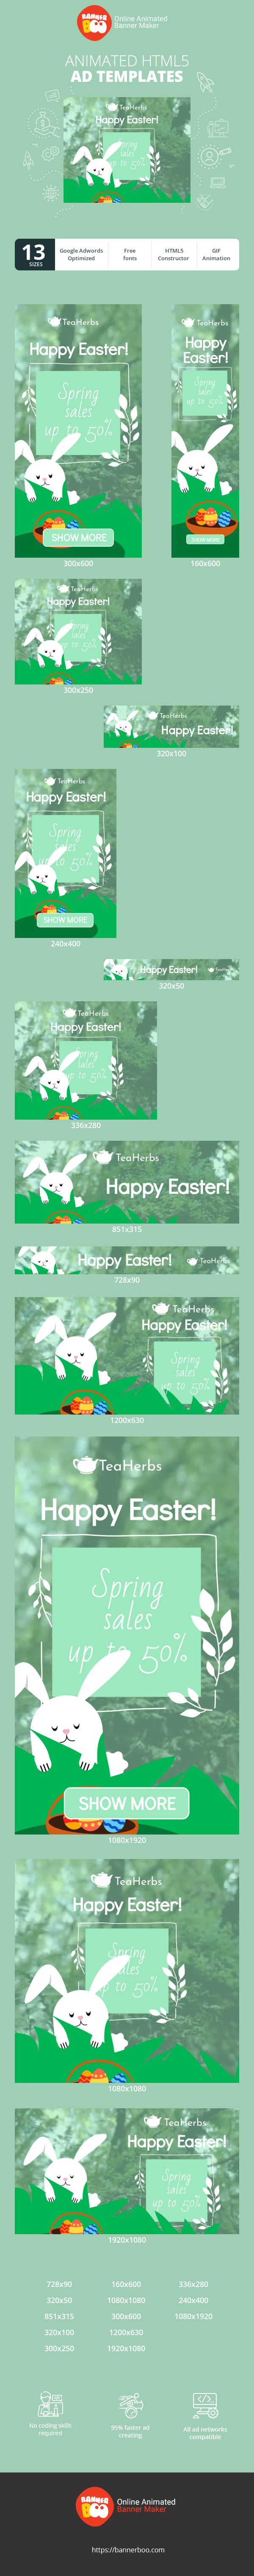 Banner ad template — Happy Easter — Spring Sales Up To 50%